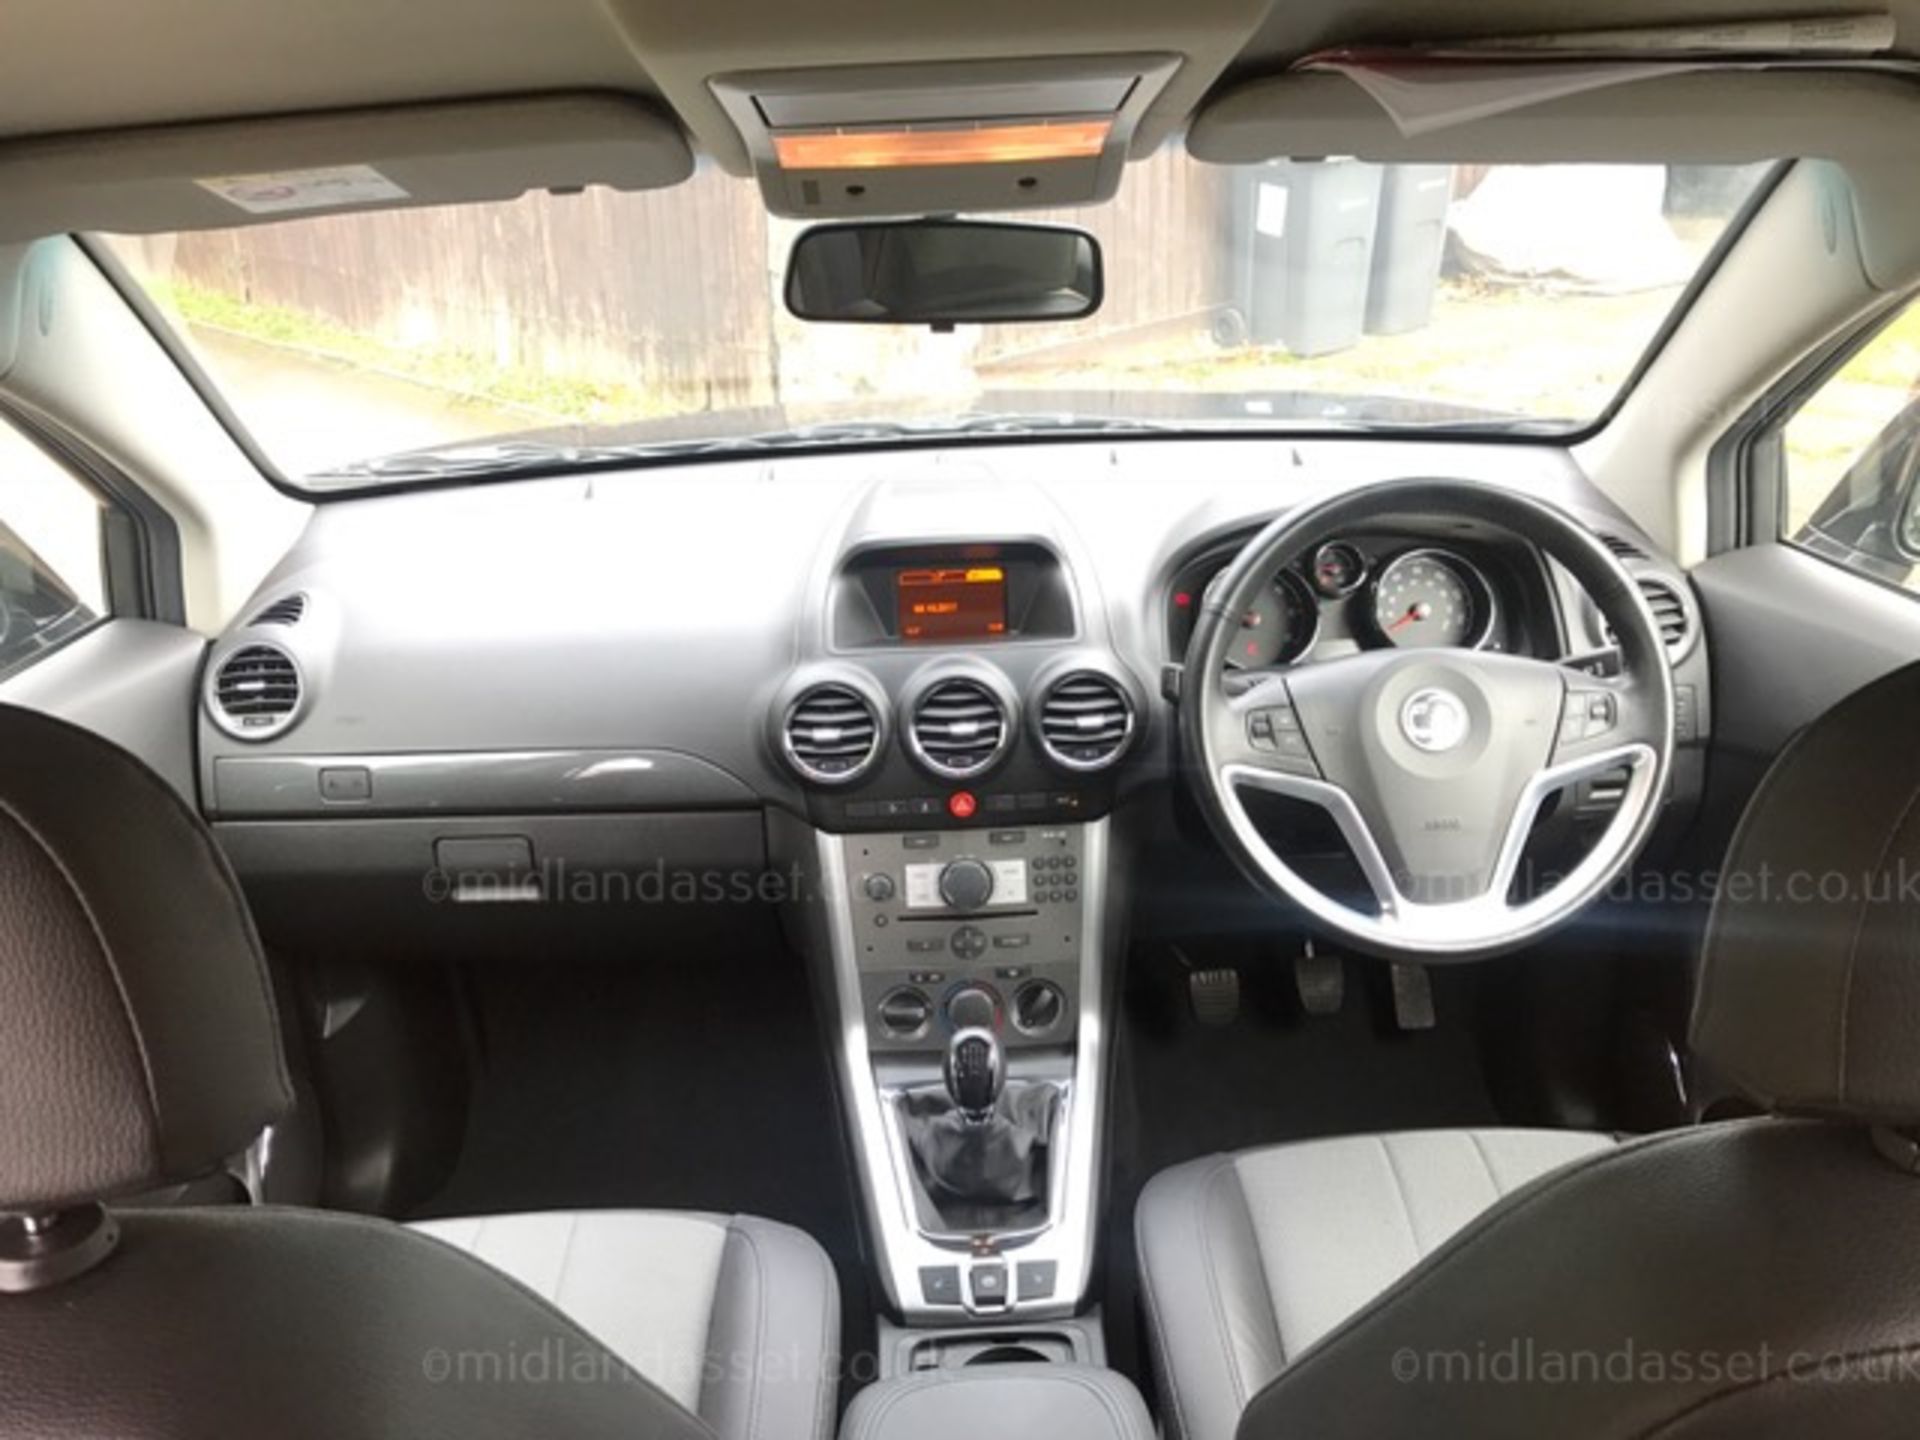 2015/15 REG VAUXHALL ANTARA EXCLUSIVE 2.2 CDTI ONE FORMER KEEPER FULL SERVICE HISTORY - Image 8 of 9